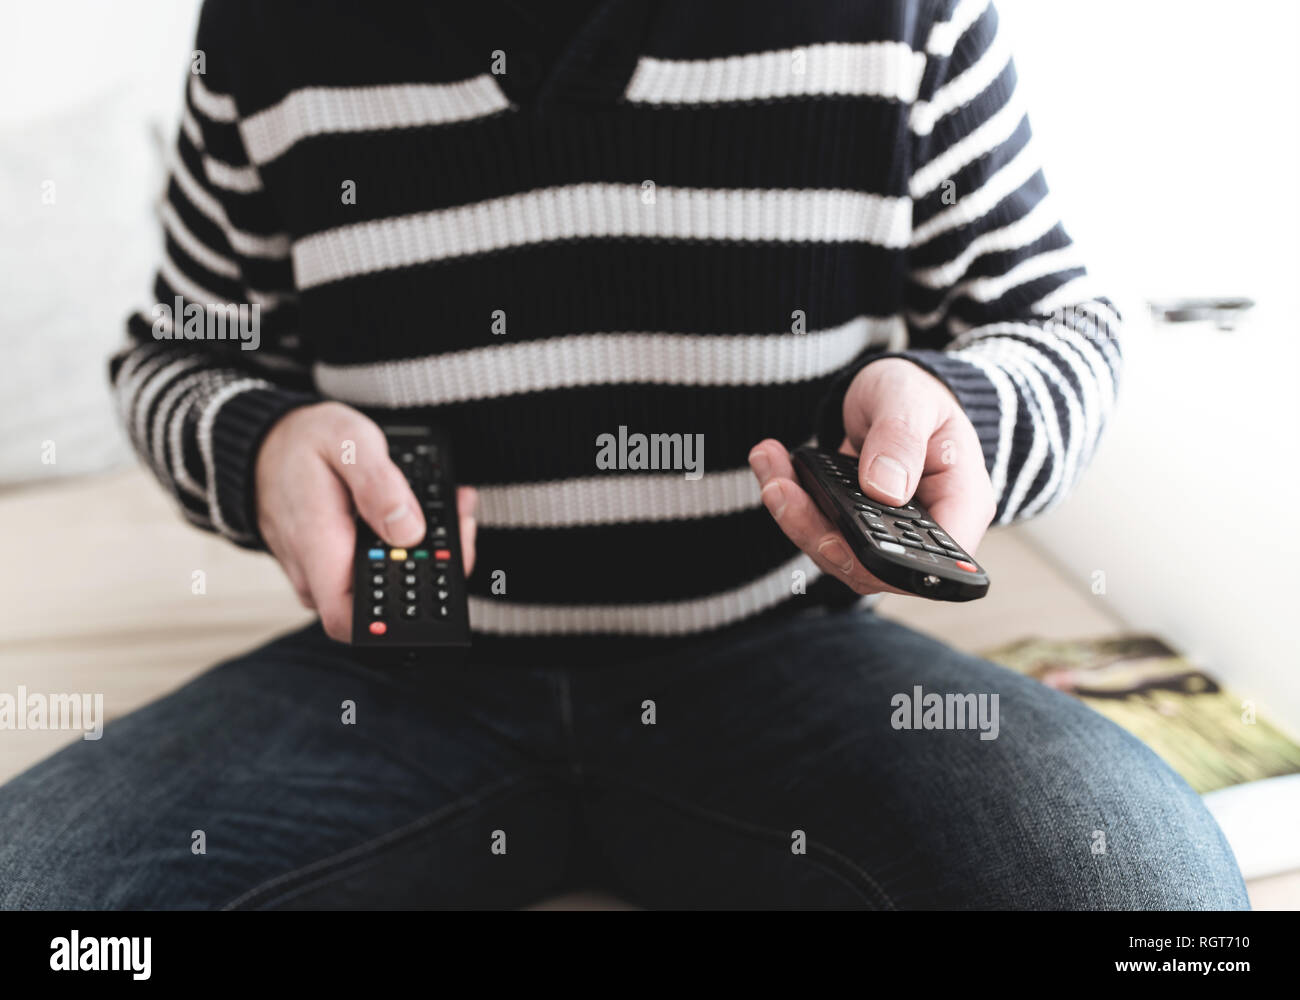 man sitting on sofa holding remote control in each hand Stock Photo